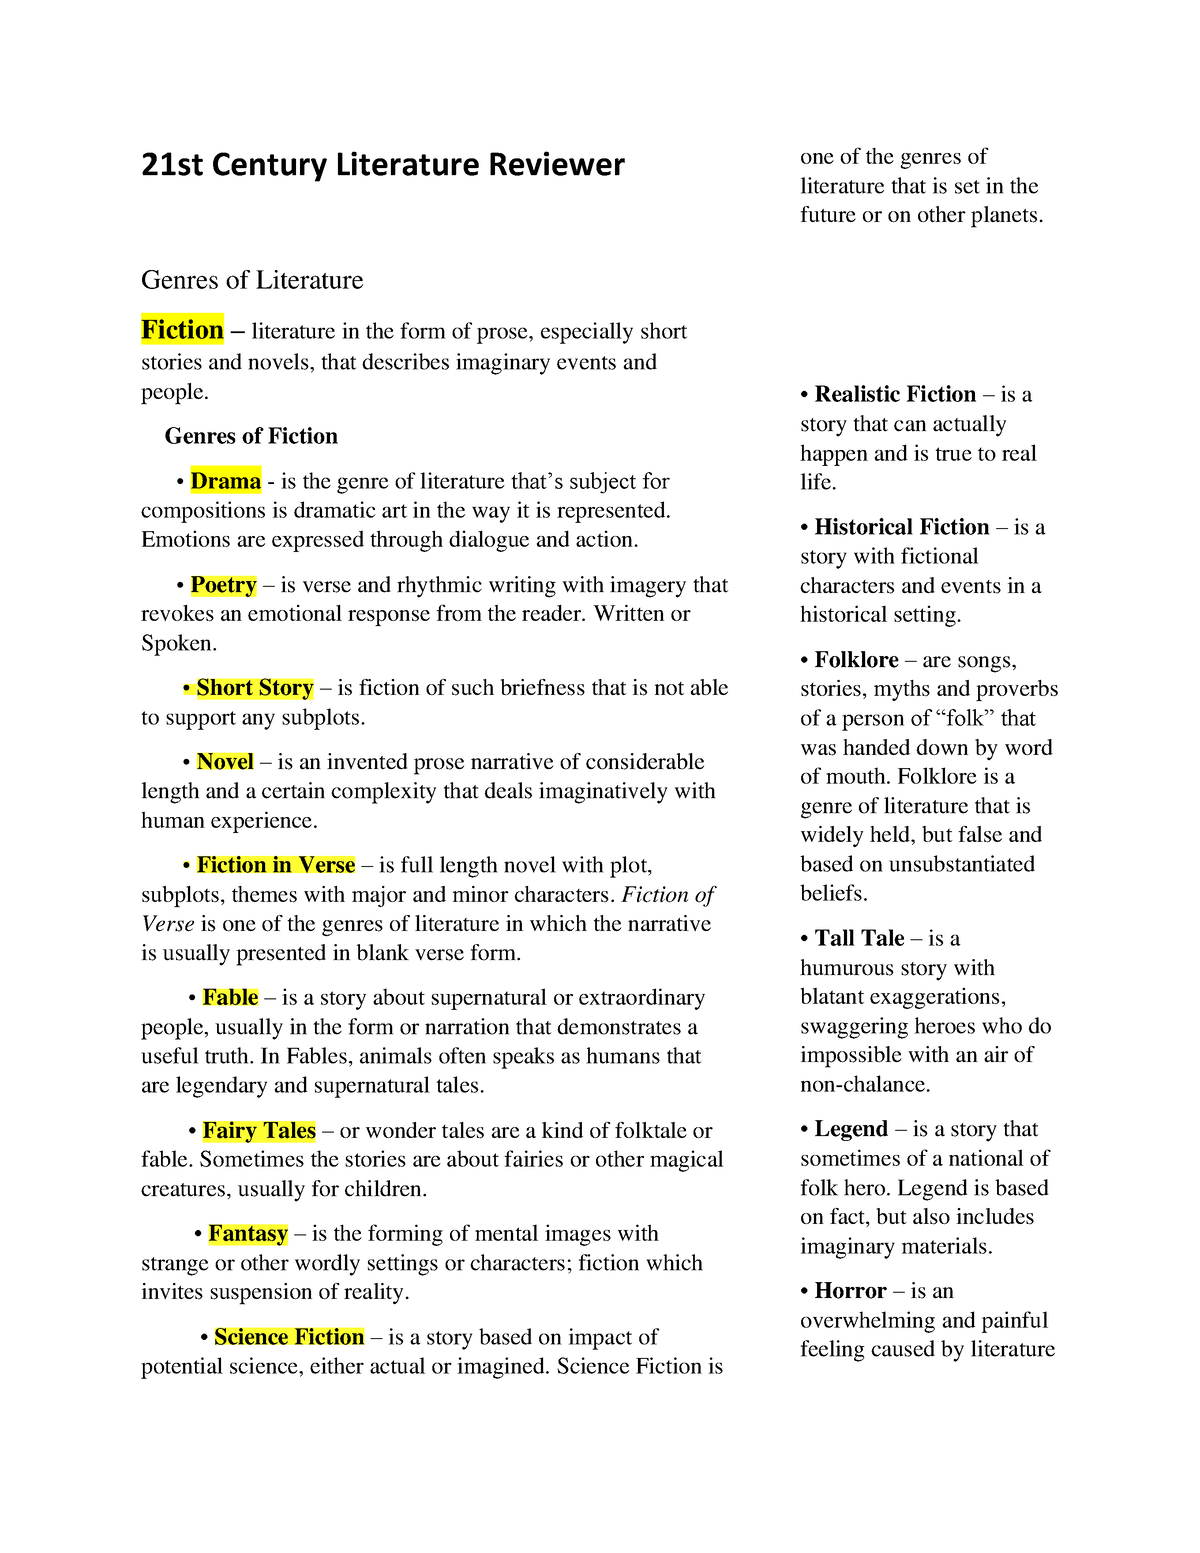 21st century literature reviewer with answer key